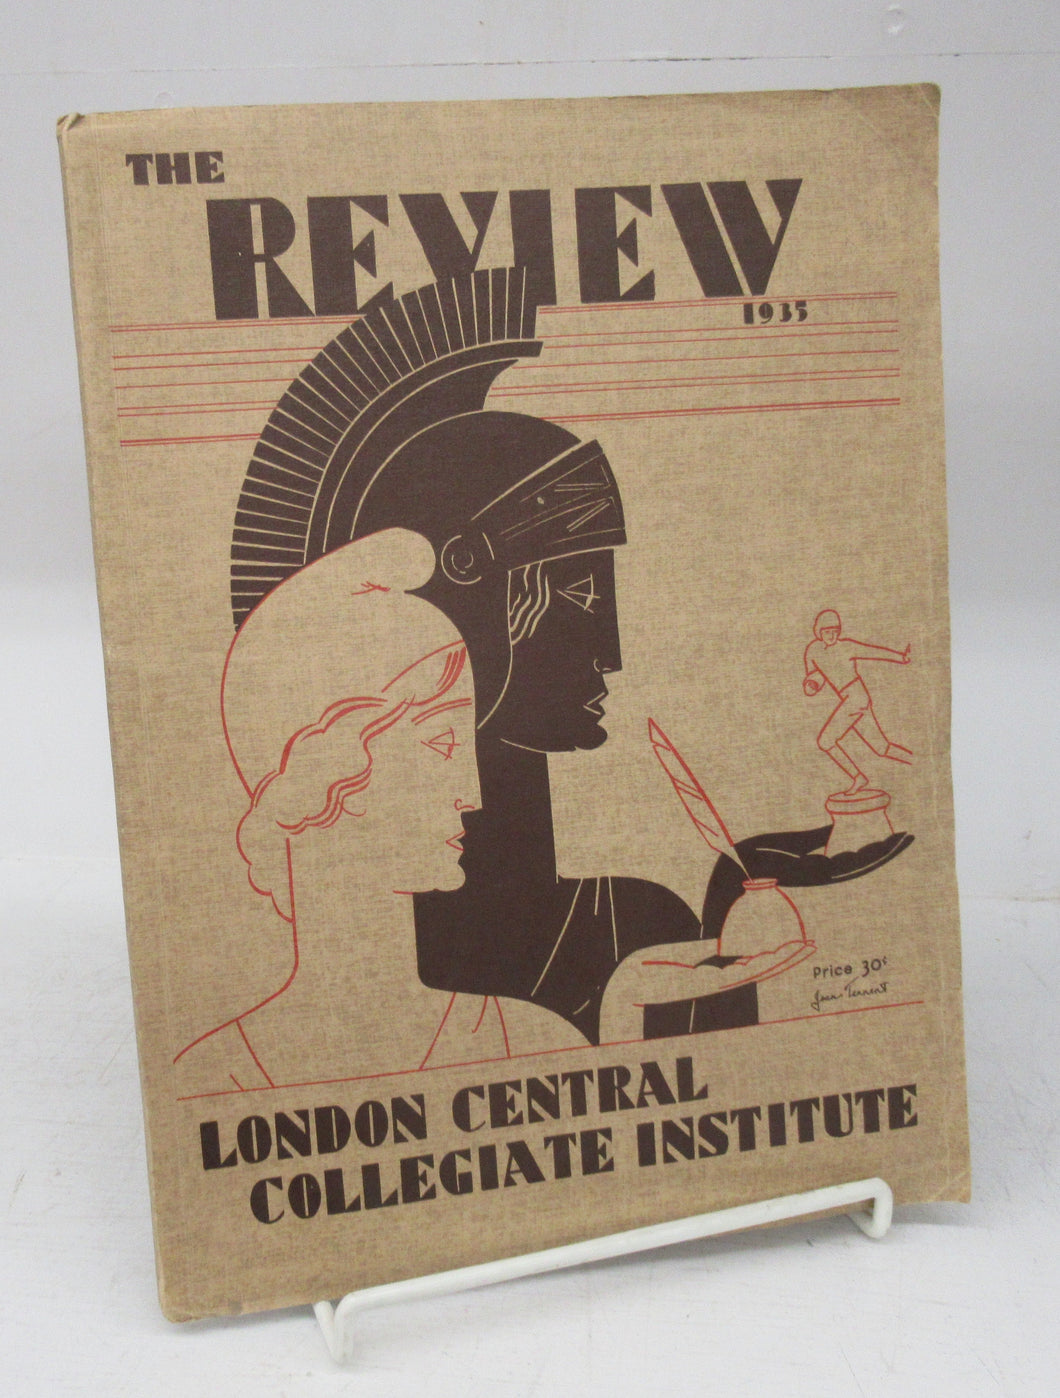 The Review, 1935